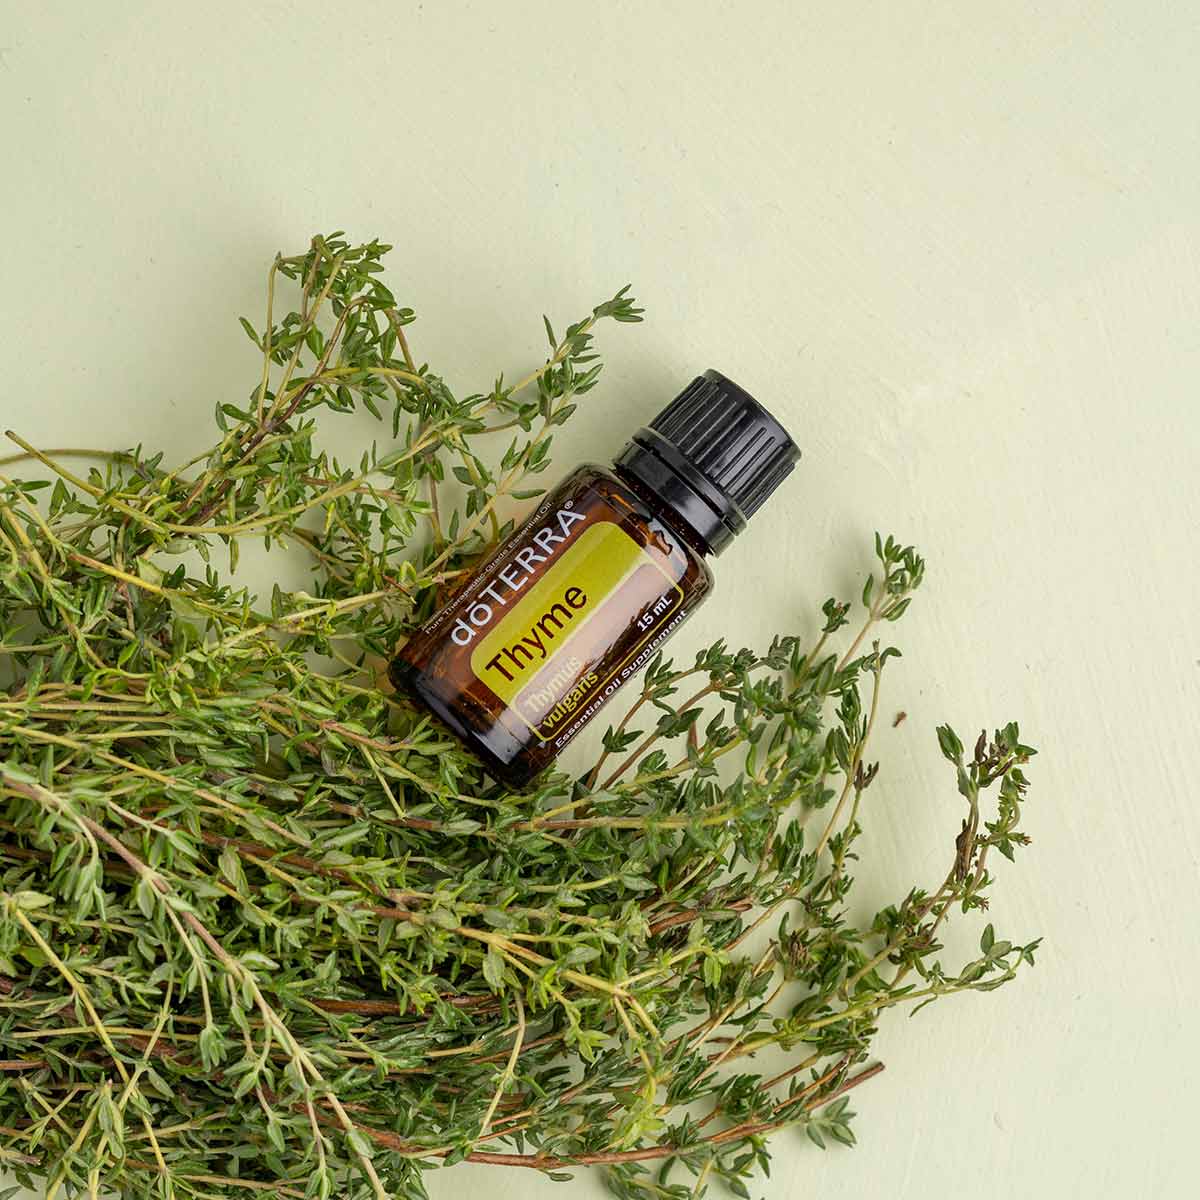 Bottle of Thyme essential oil next to fresh thyme sprigs. What does Thyme oil smell like? Thyme essential oil has a warm, herbaceous aroma that is extremely potent.